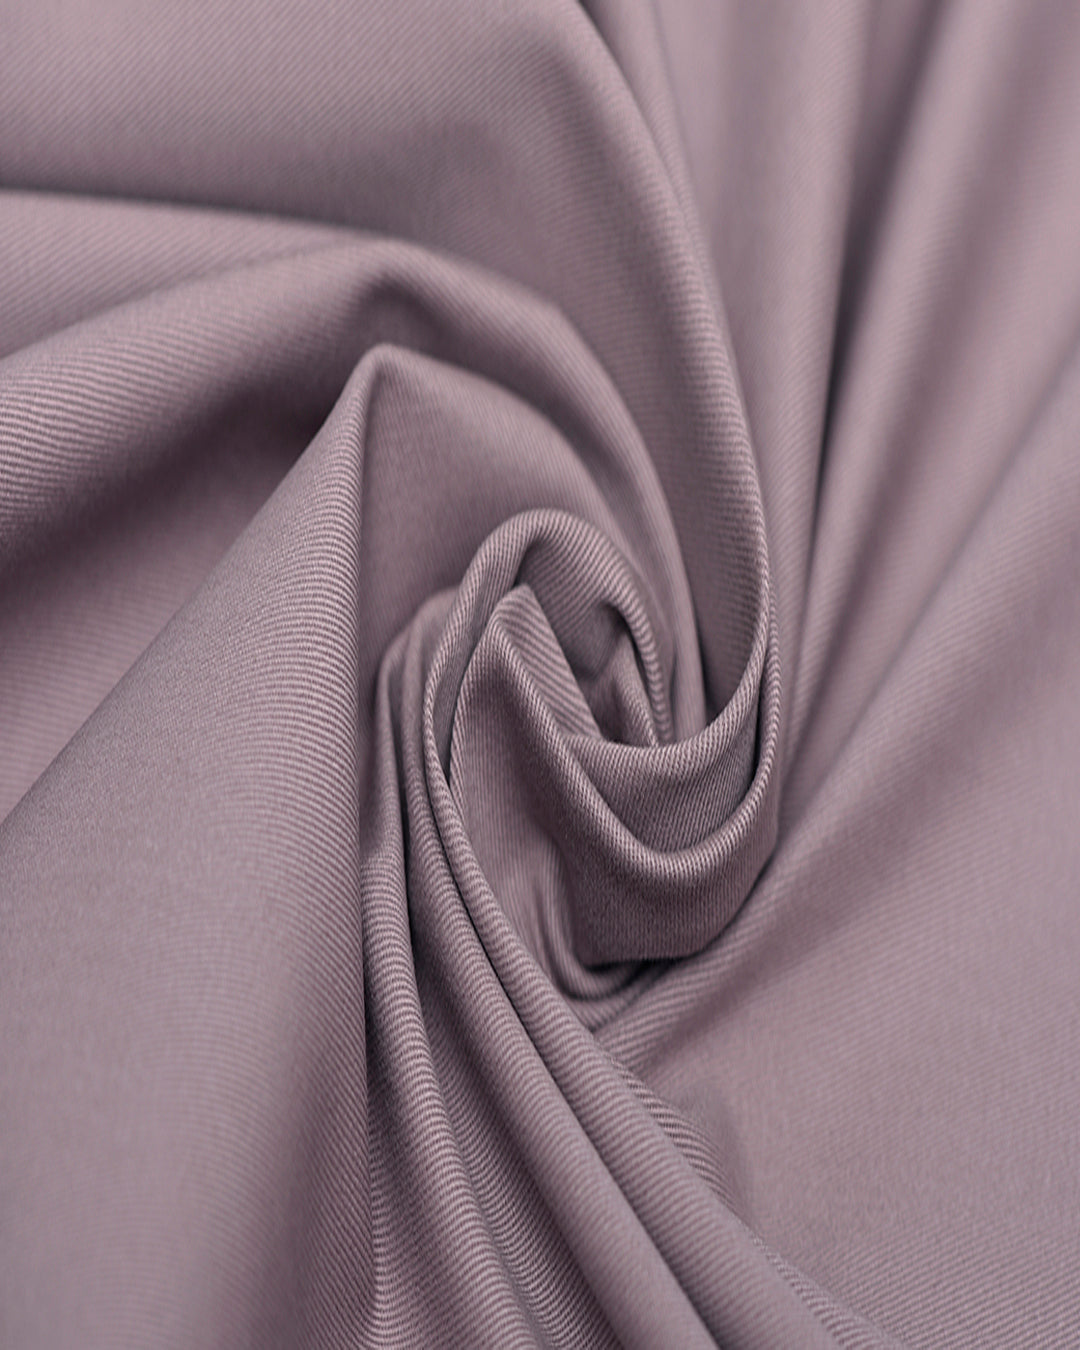 Closeup view of custom Genoa Chino pants for men by Luxire in purple fade